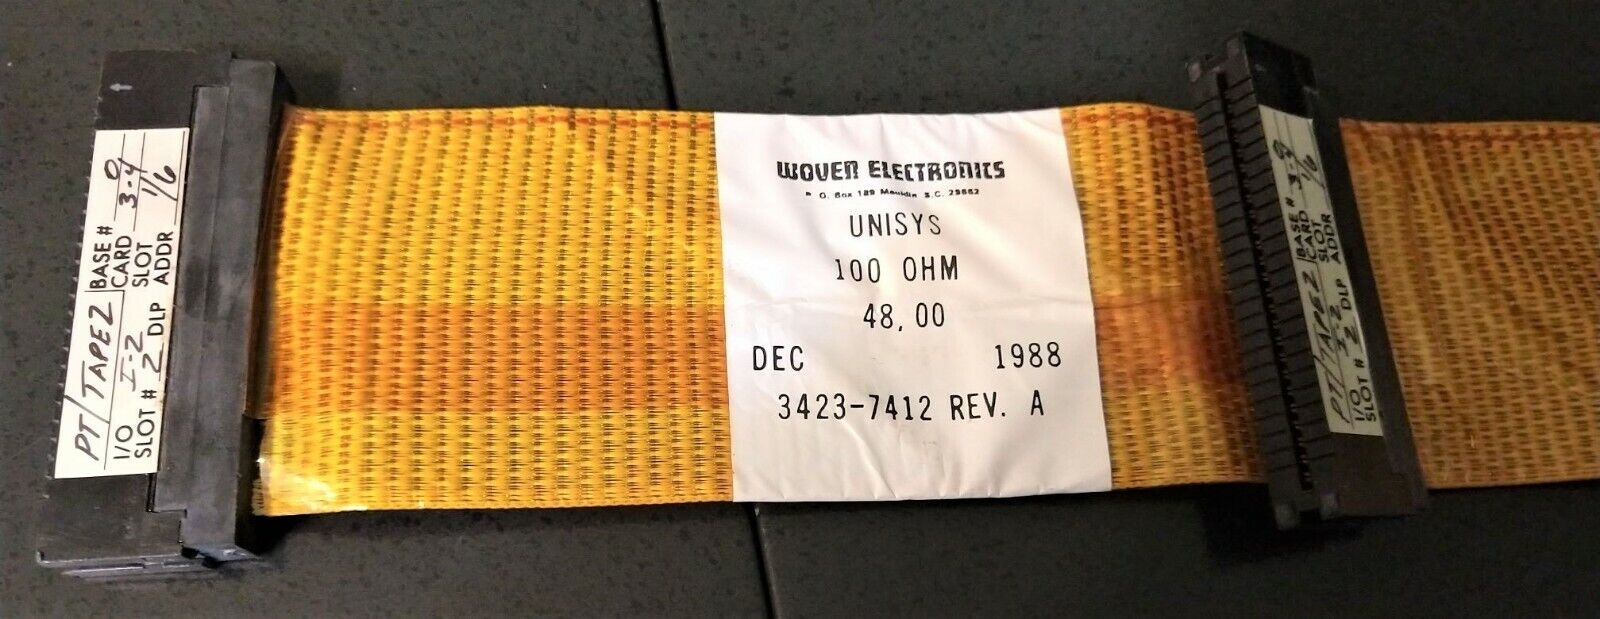 Lot of four Vintage Woven Electronic cables, from a Unisys Mainframe